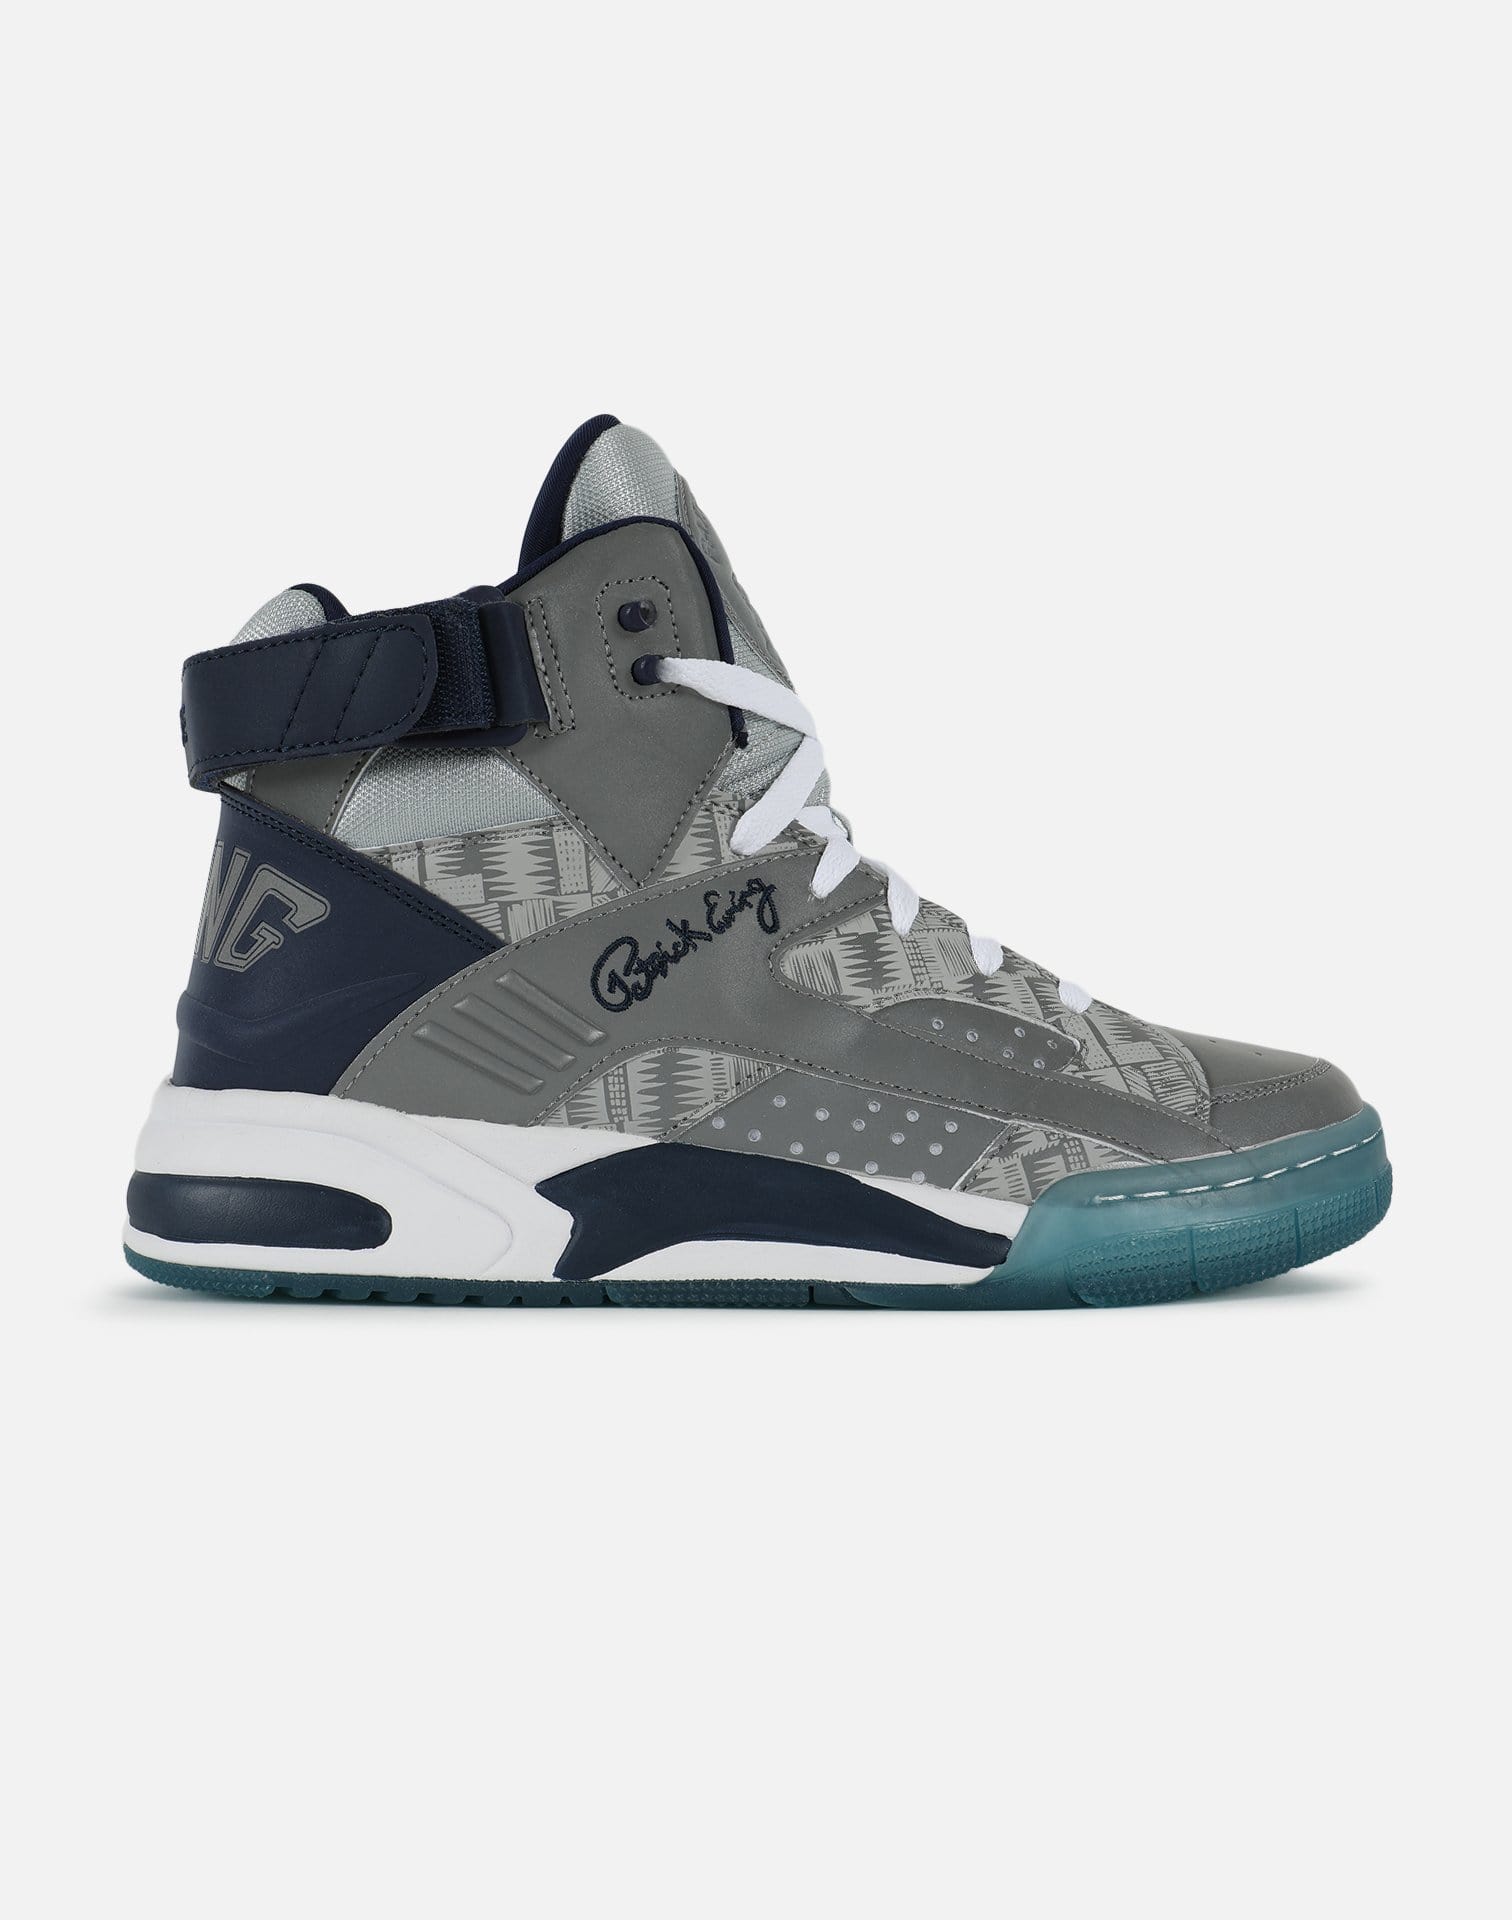 DTLR Exclusive Ewing Eclipse 'G-Town' SMU